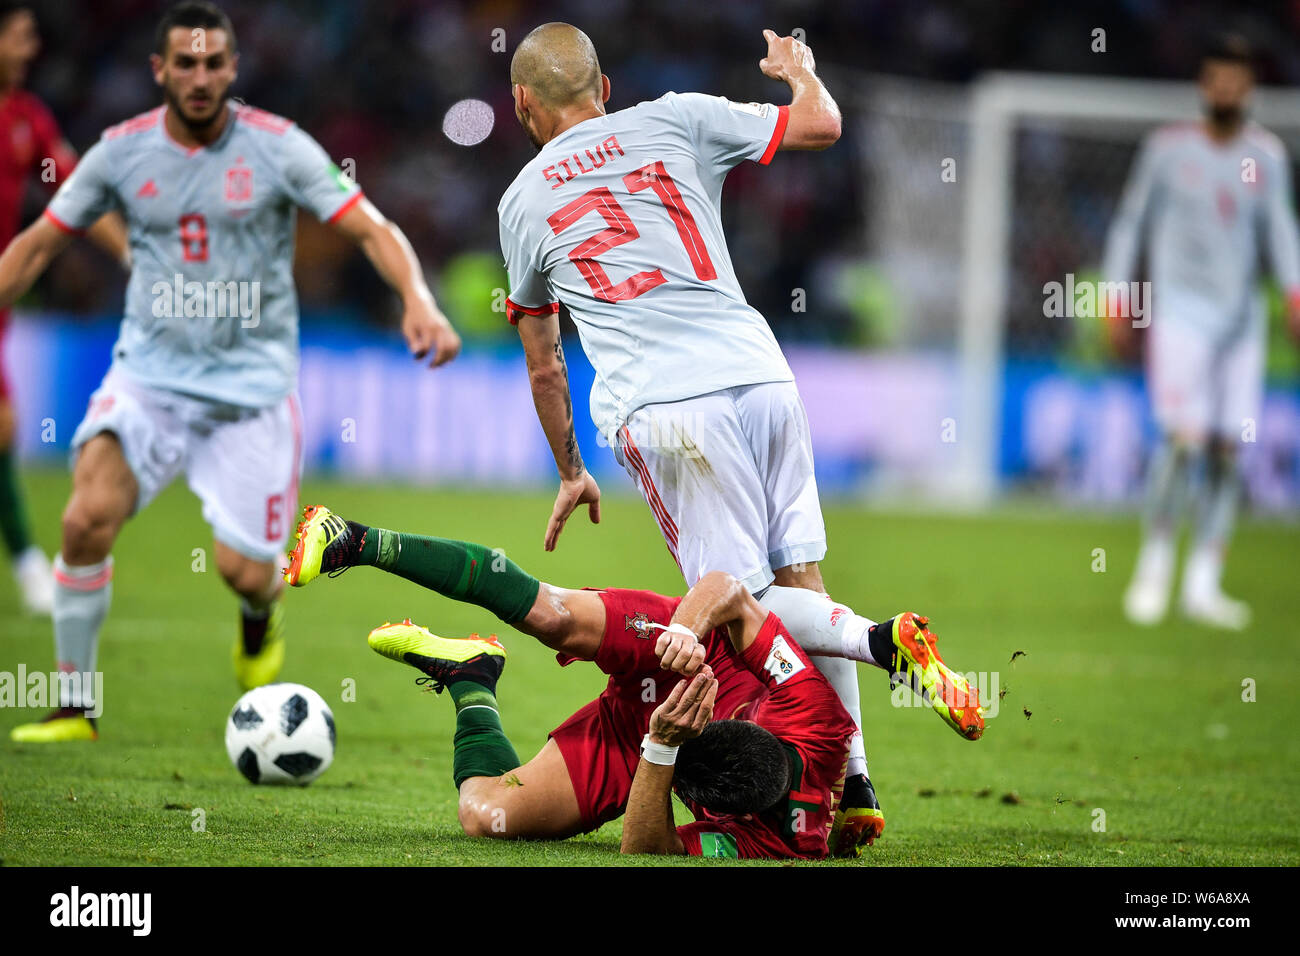 David Silva of Spain, right, challenges a player of Portugal in their Group B match during the 2018 FIFA World Cup in Sochi, Russia, 15 June 2018.   C Stock Photo